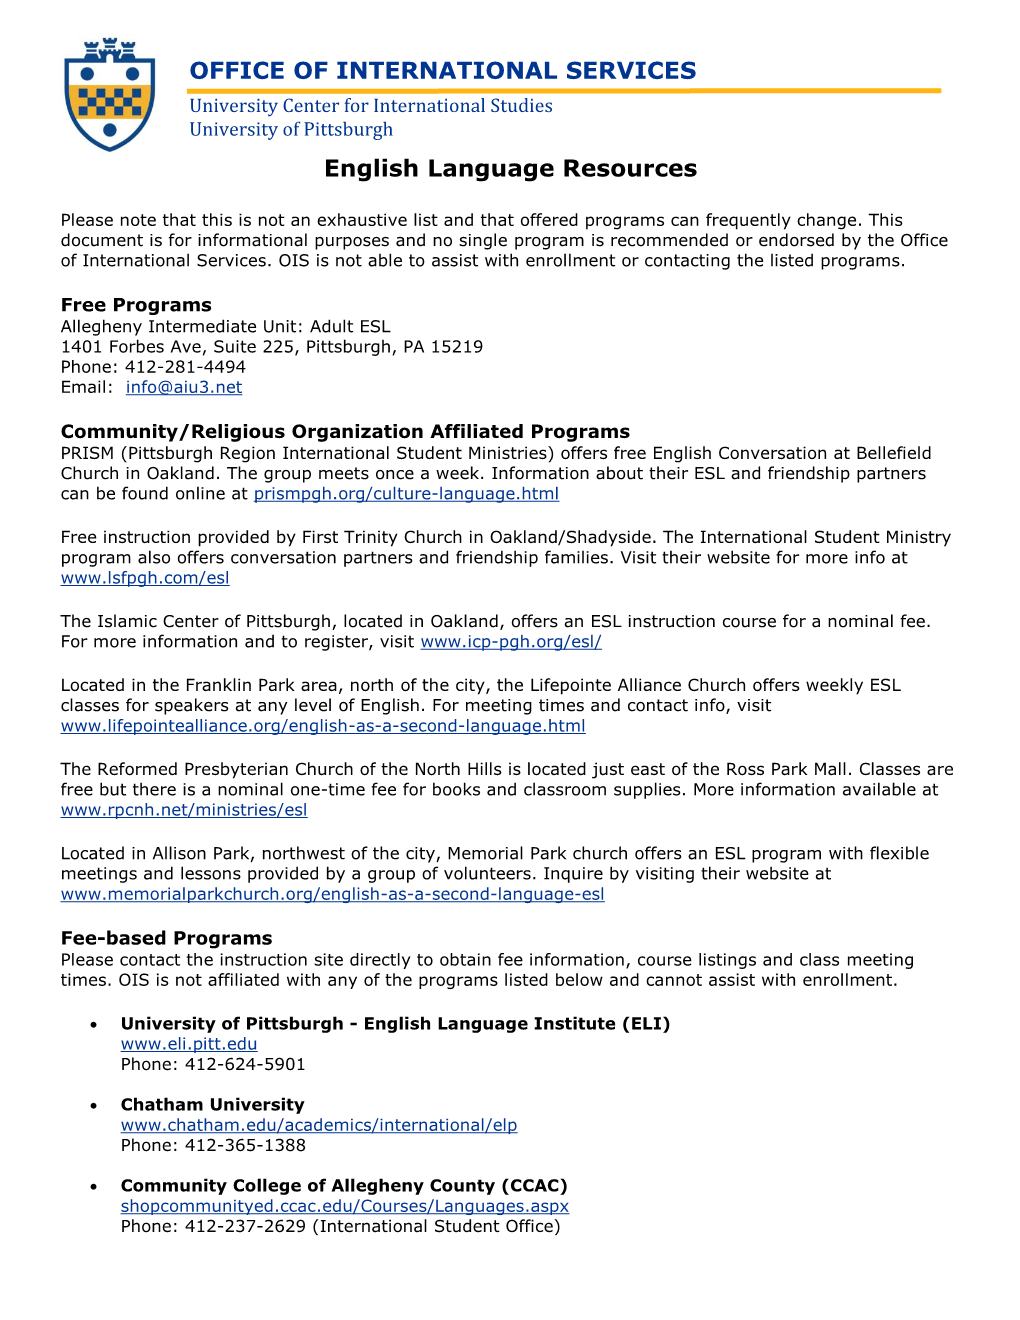 English As a Second Language (ESL) Resources